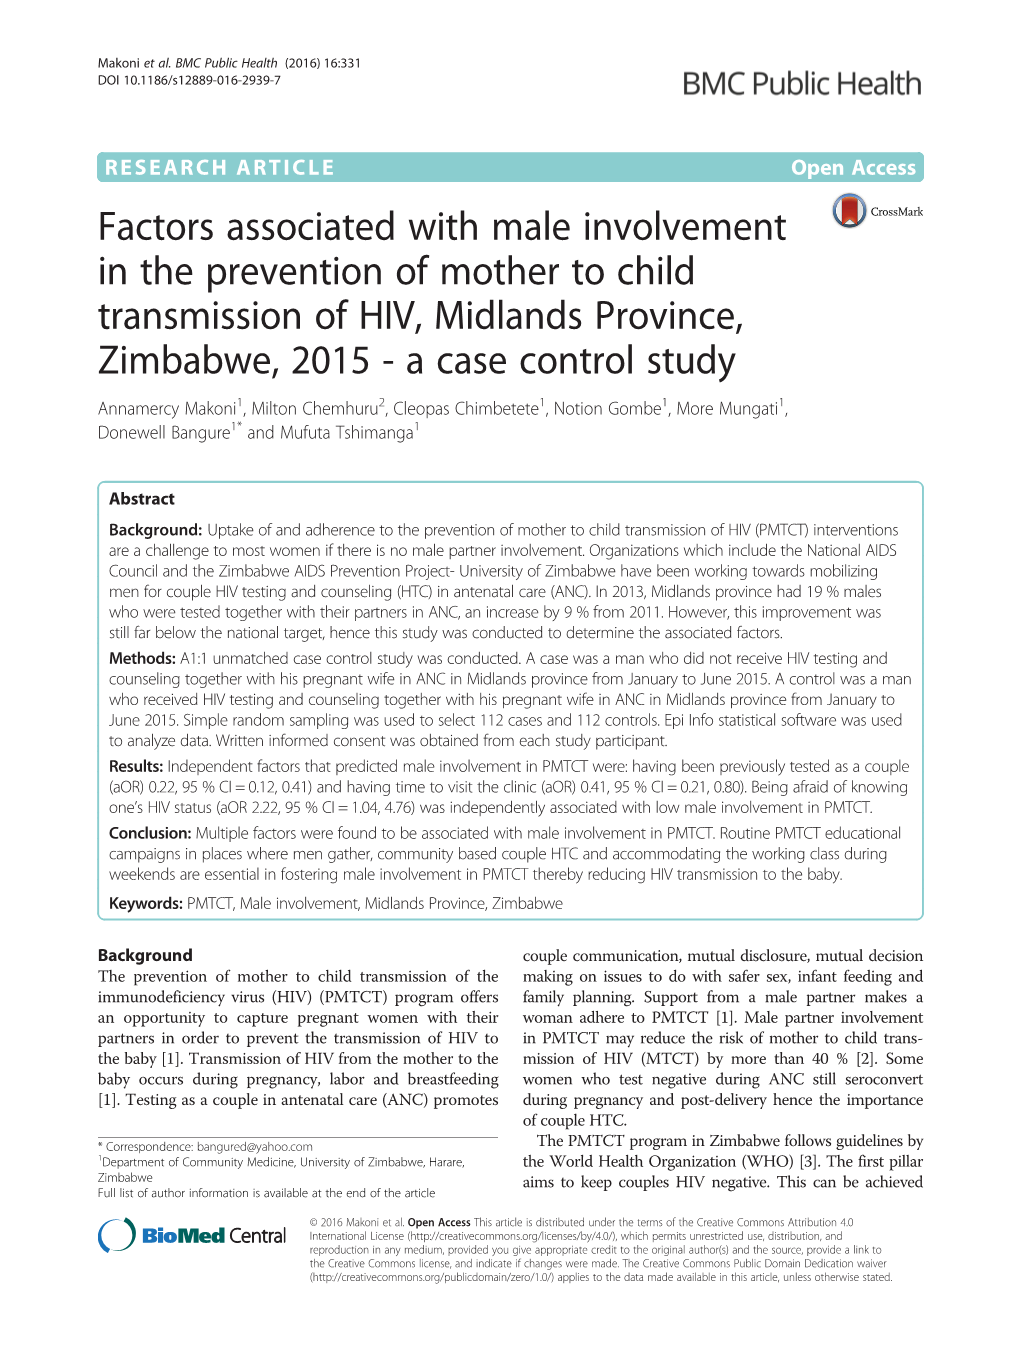 Factors Associated with Male Involvement in the Prevention Of